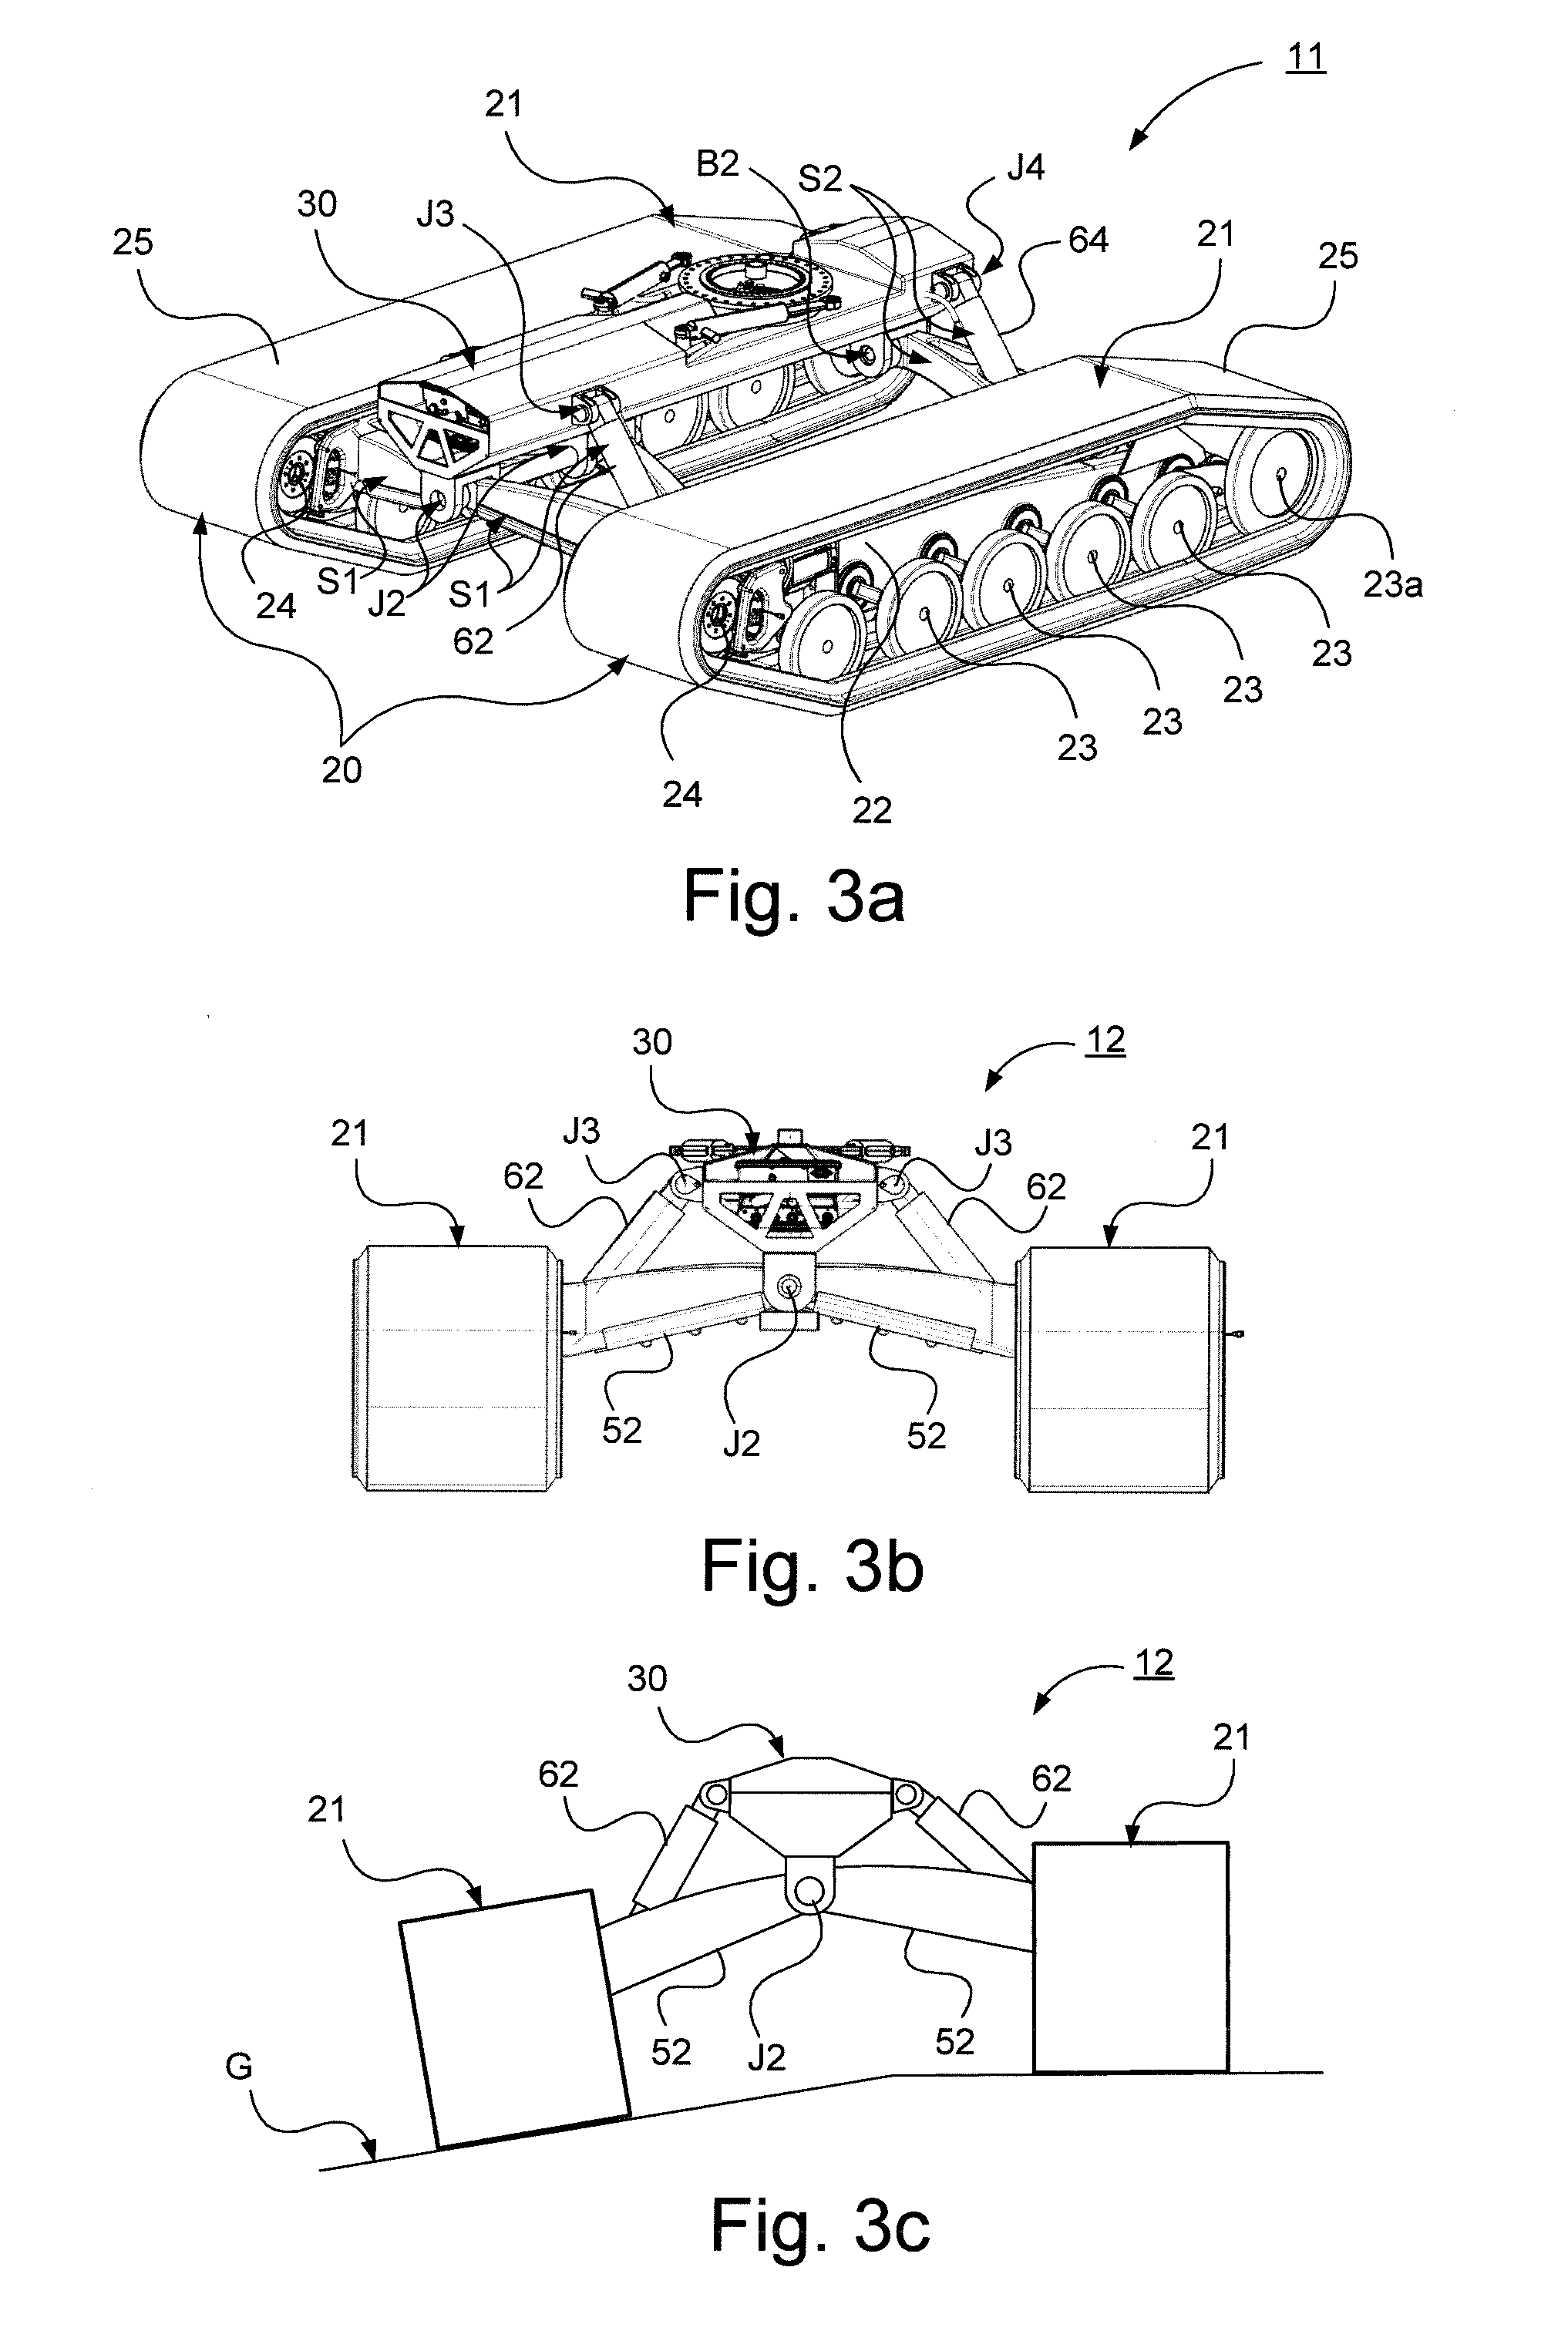 Suspension device for tracked vehicle